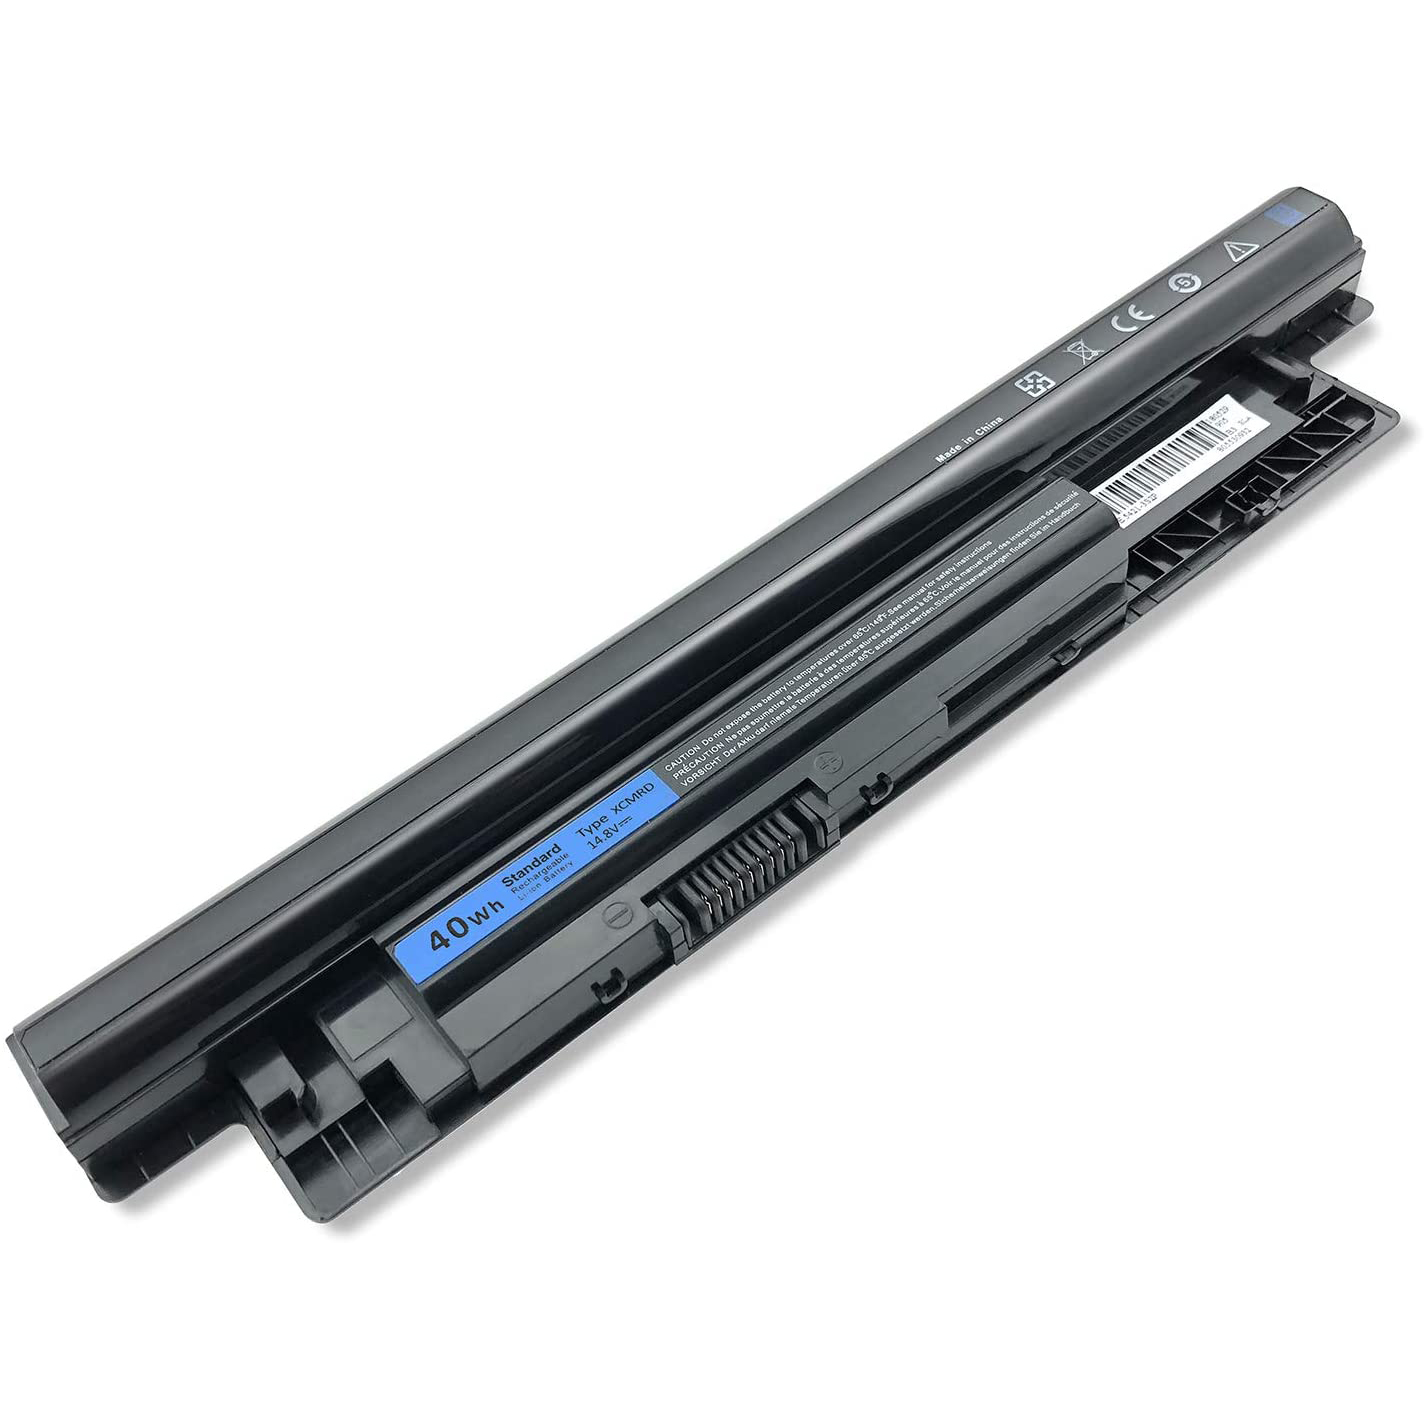 BATTERY FOR NOTEBOOK DELL INSPIRON XCMRD 15-3000 15-3521 15-3537 15-3541 15-3542 15-5521 15-N3521 15-N5421 15-1528 M&M COPY, Laptop Battery